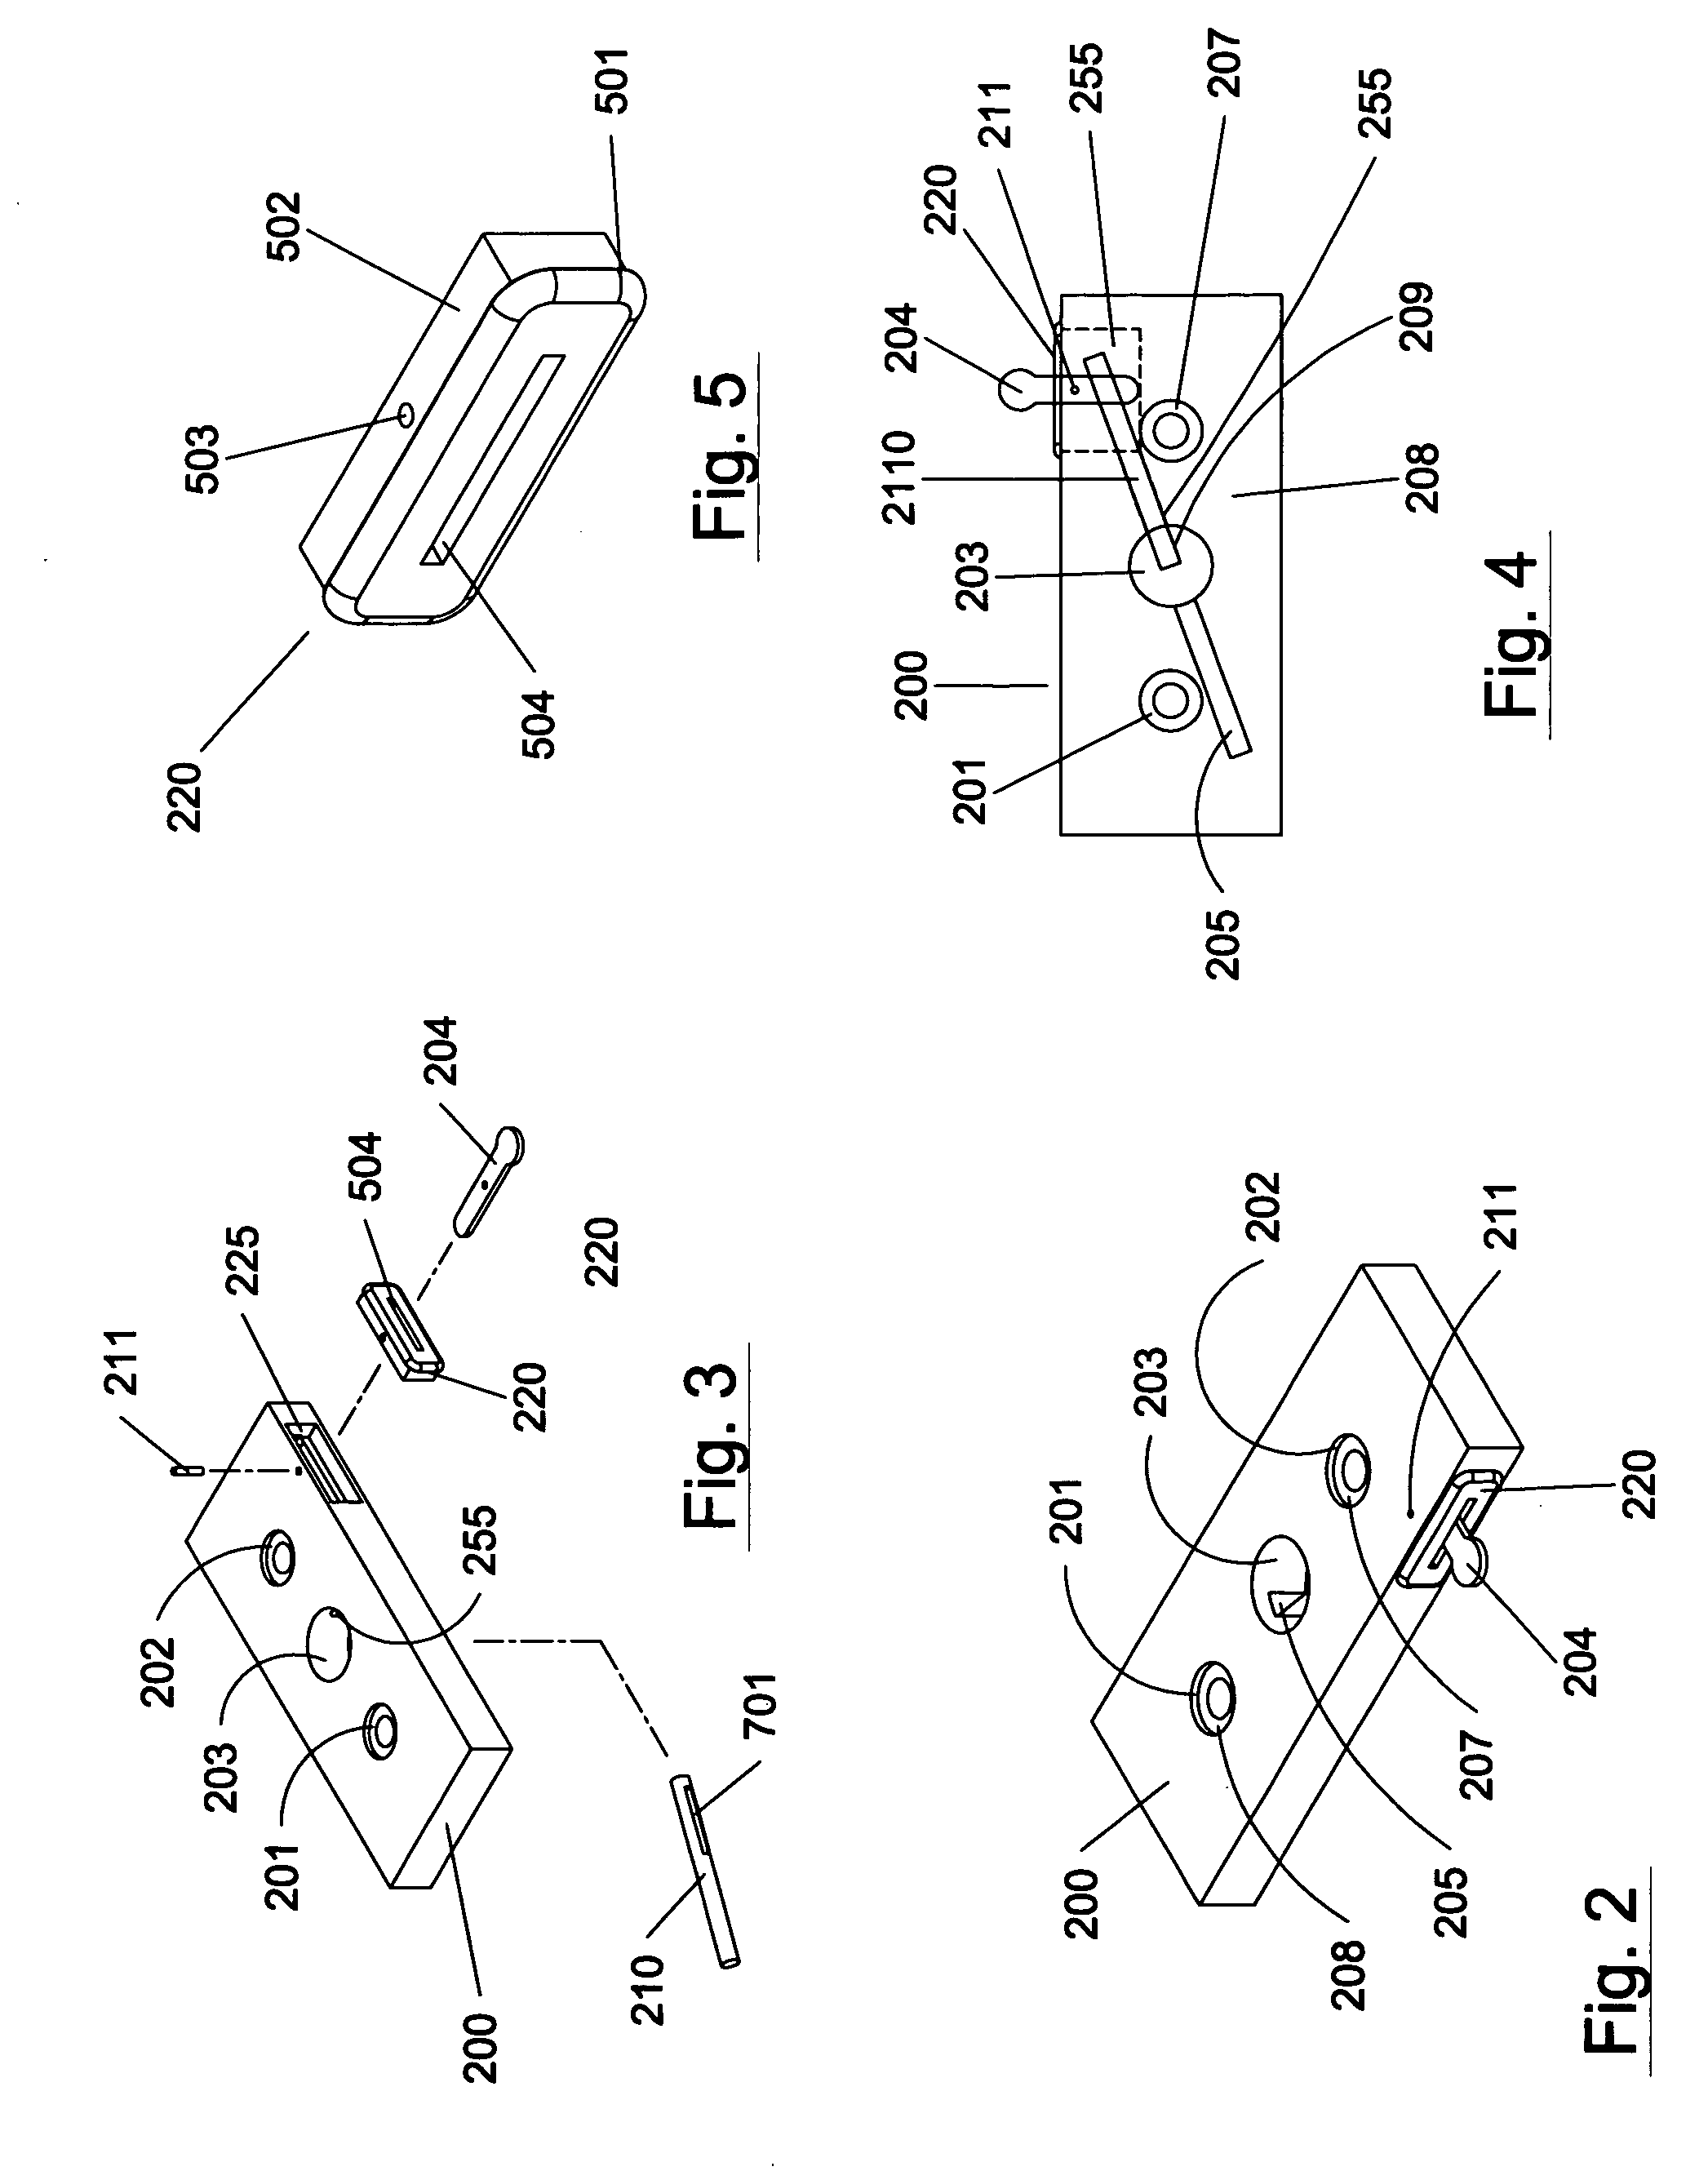 Weight plate with externally actuated internal locking device